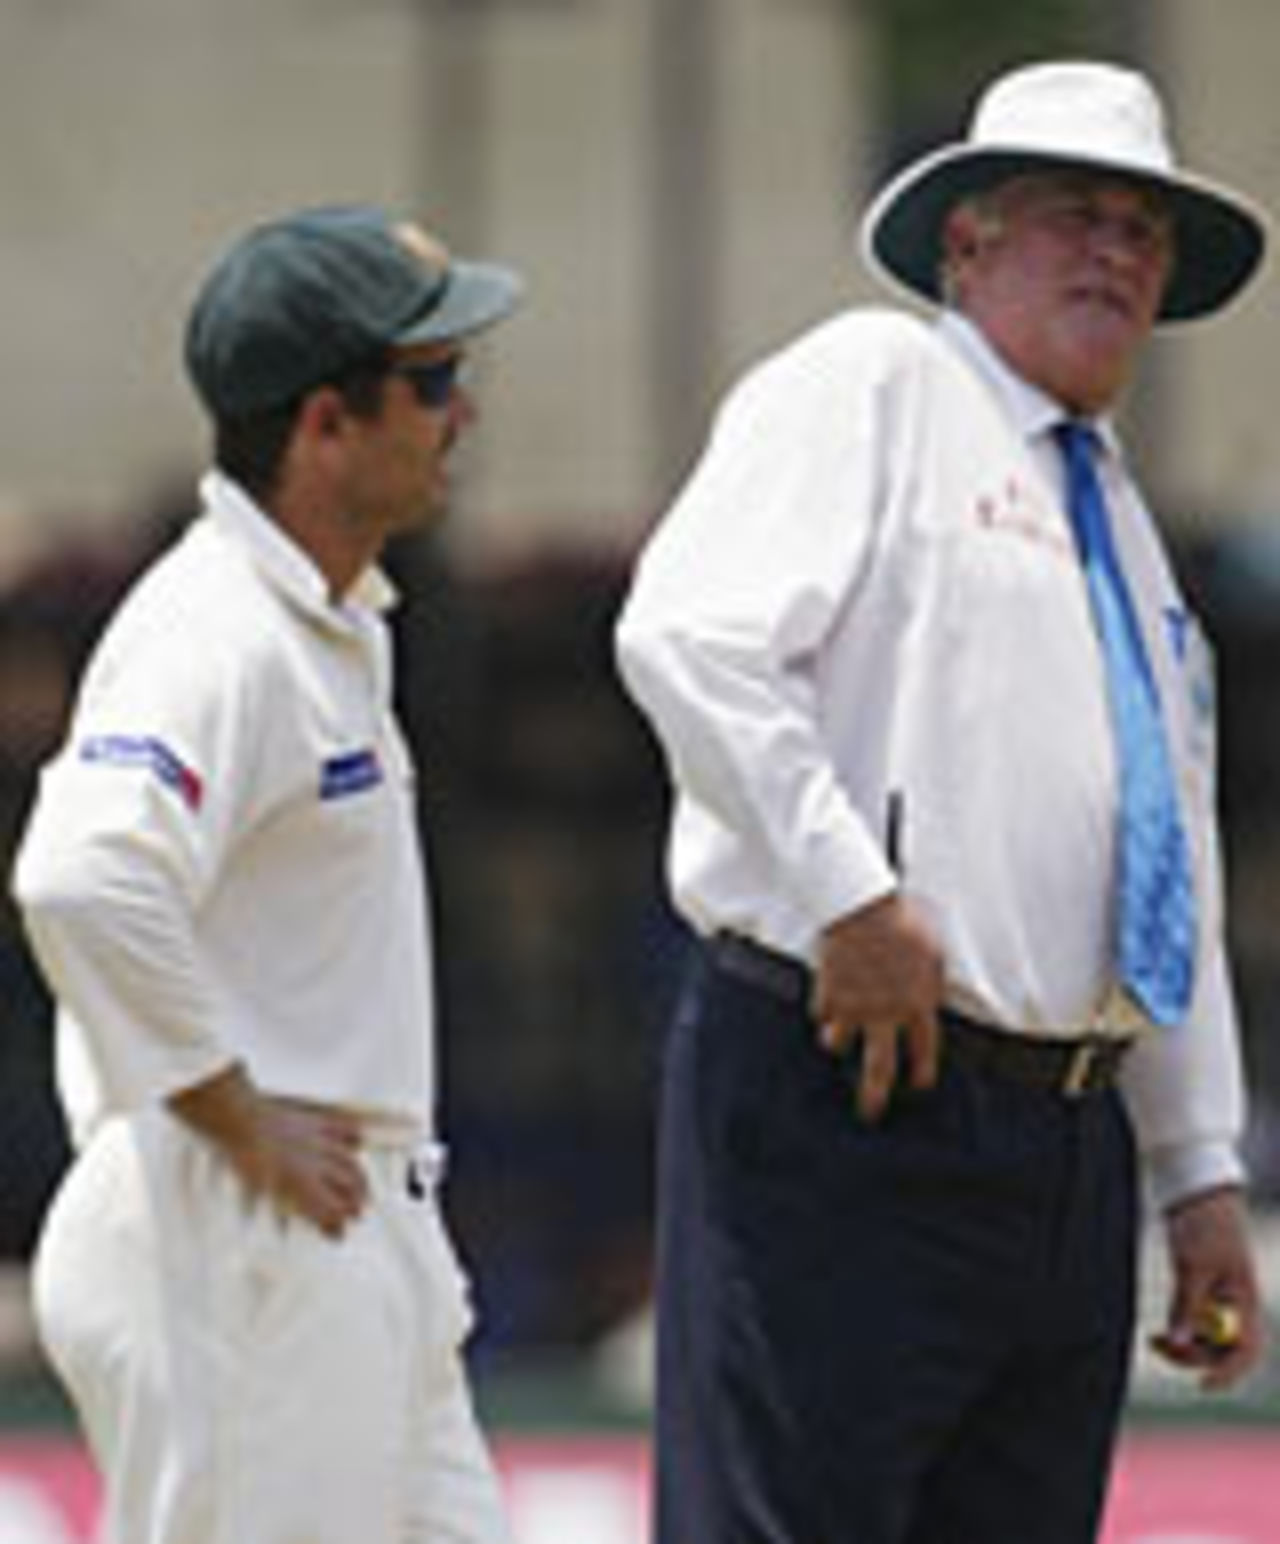 Justin Langer of Australia and umpire David Orchard discuss an incident that lead to the third umpire being called to investigate an appeal for hit wicket against Hashan Tillakaratne of Sri Lanka it was later revealed that the wicket had been broken by Justin Langer , Sri Lanka v Australia, 3rd Test, Colombo, 3rd day, March 26, 2004